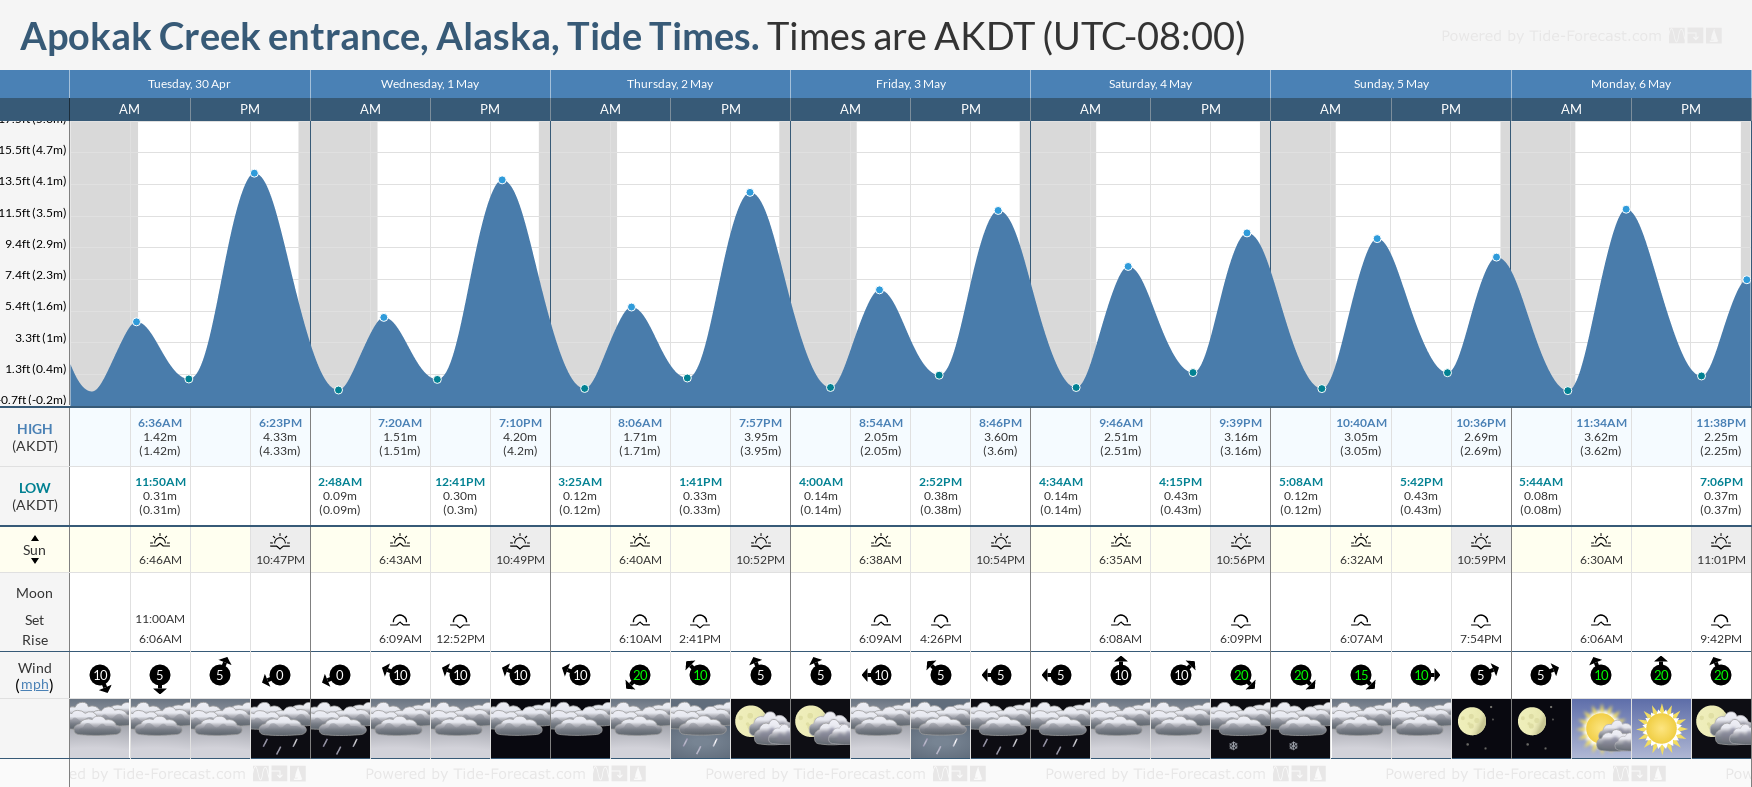 Apokak Creek entrance, Alaska Tide Chart including high and low tide tide times for the next 7 days